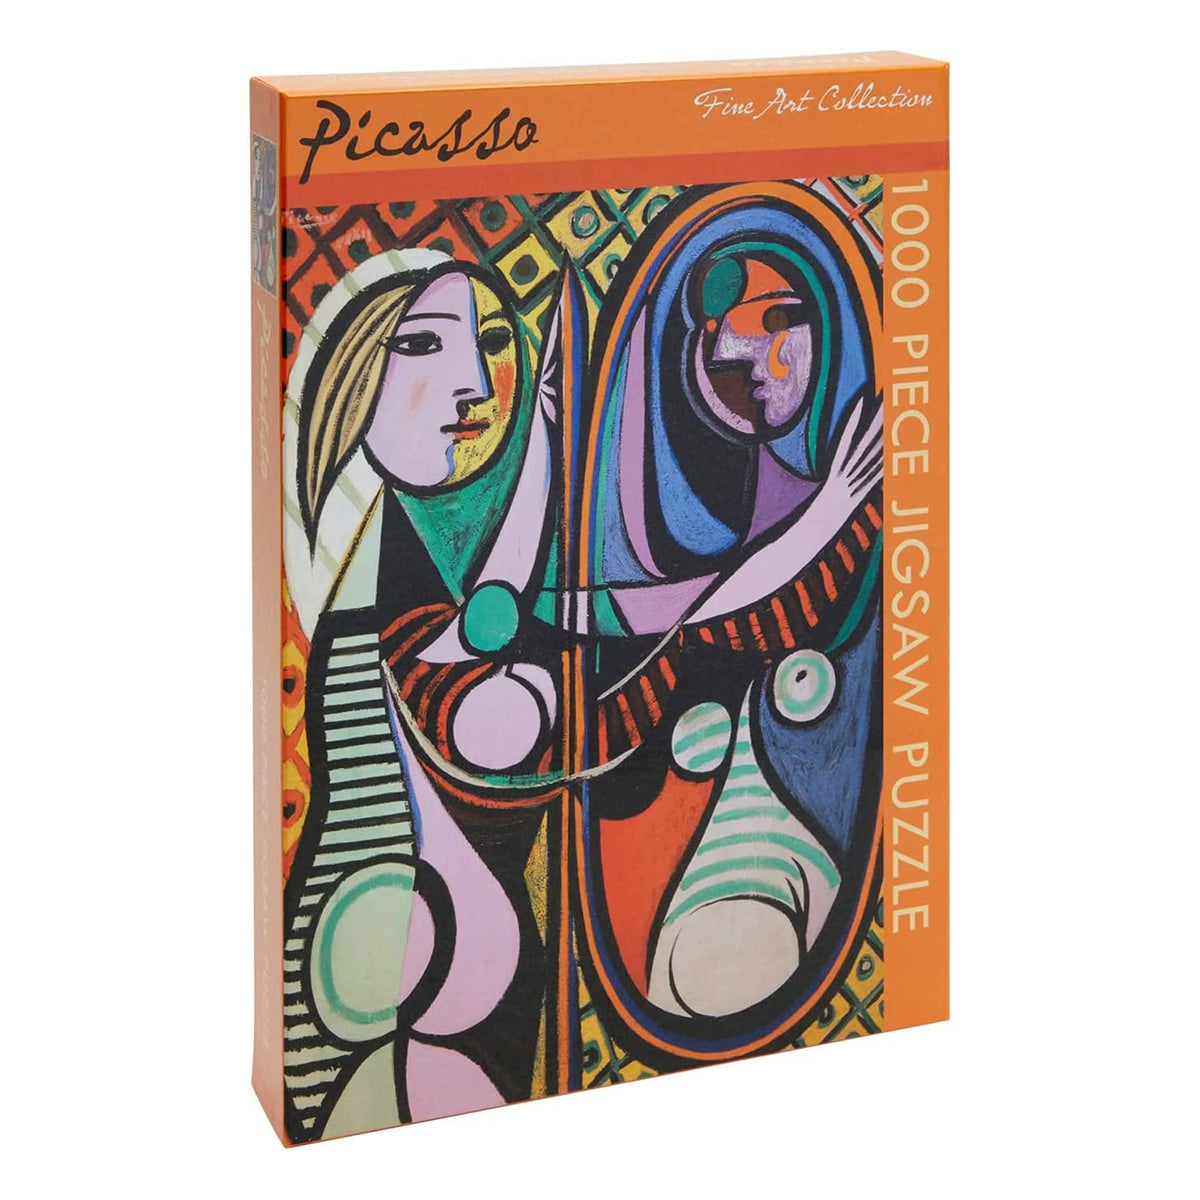 Fine art puzzle inspired by the surrealist works of Pablo Picasso